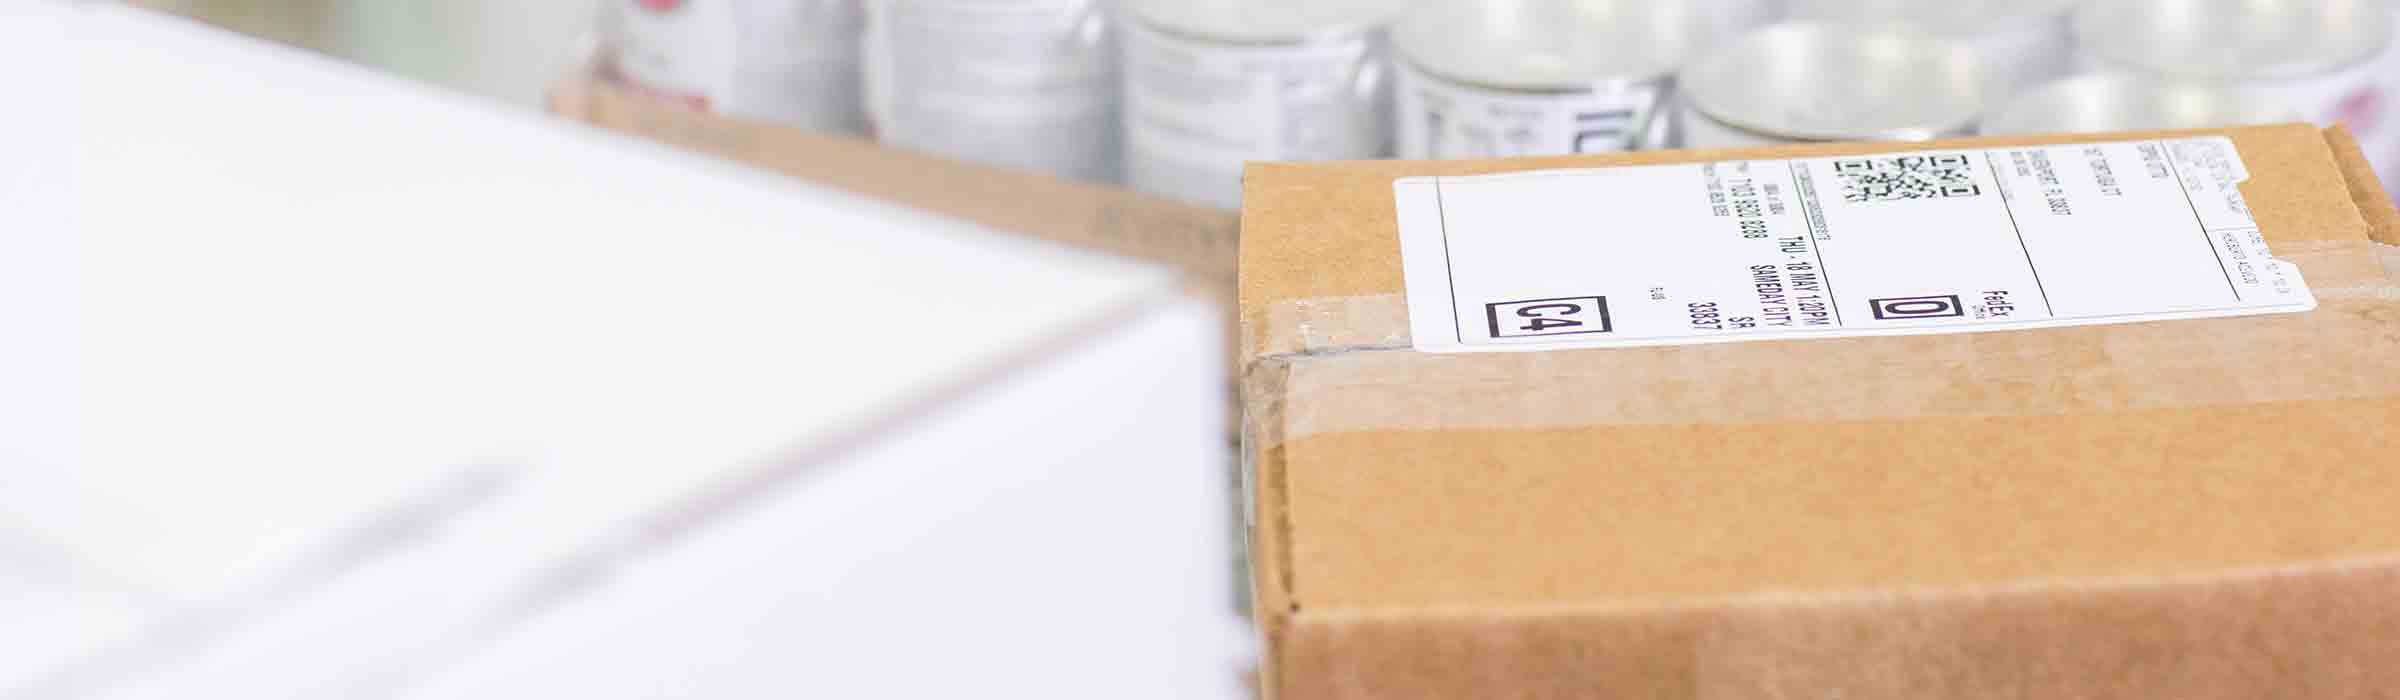 How To Complete Shipping Labels And Shipping Documents | Fedex In Fedex Label Template Word